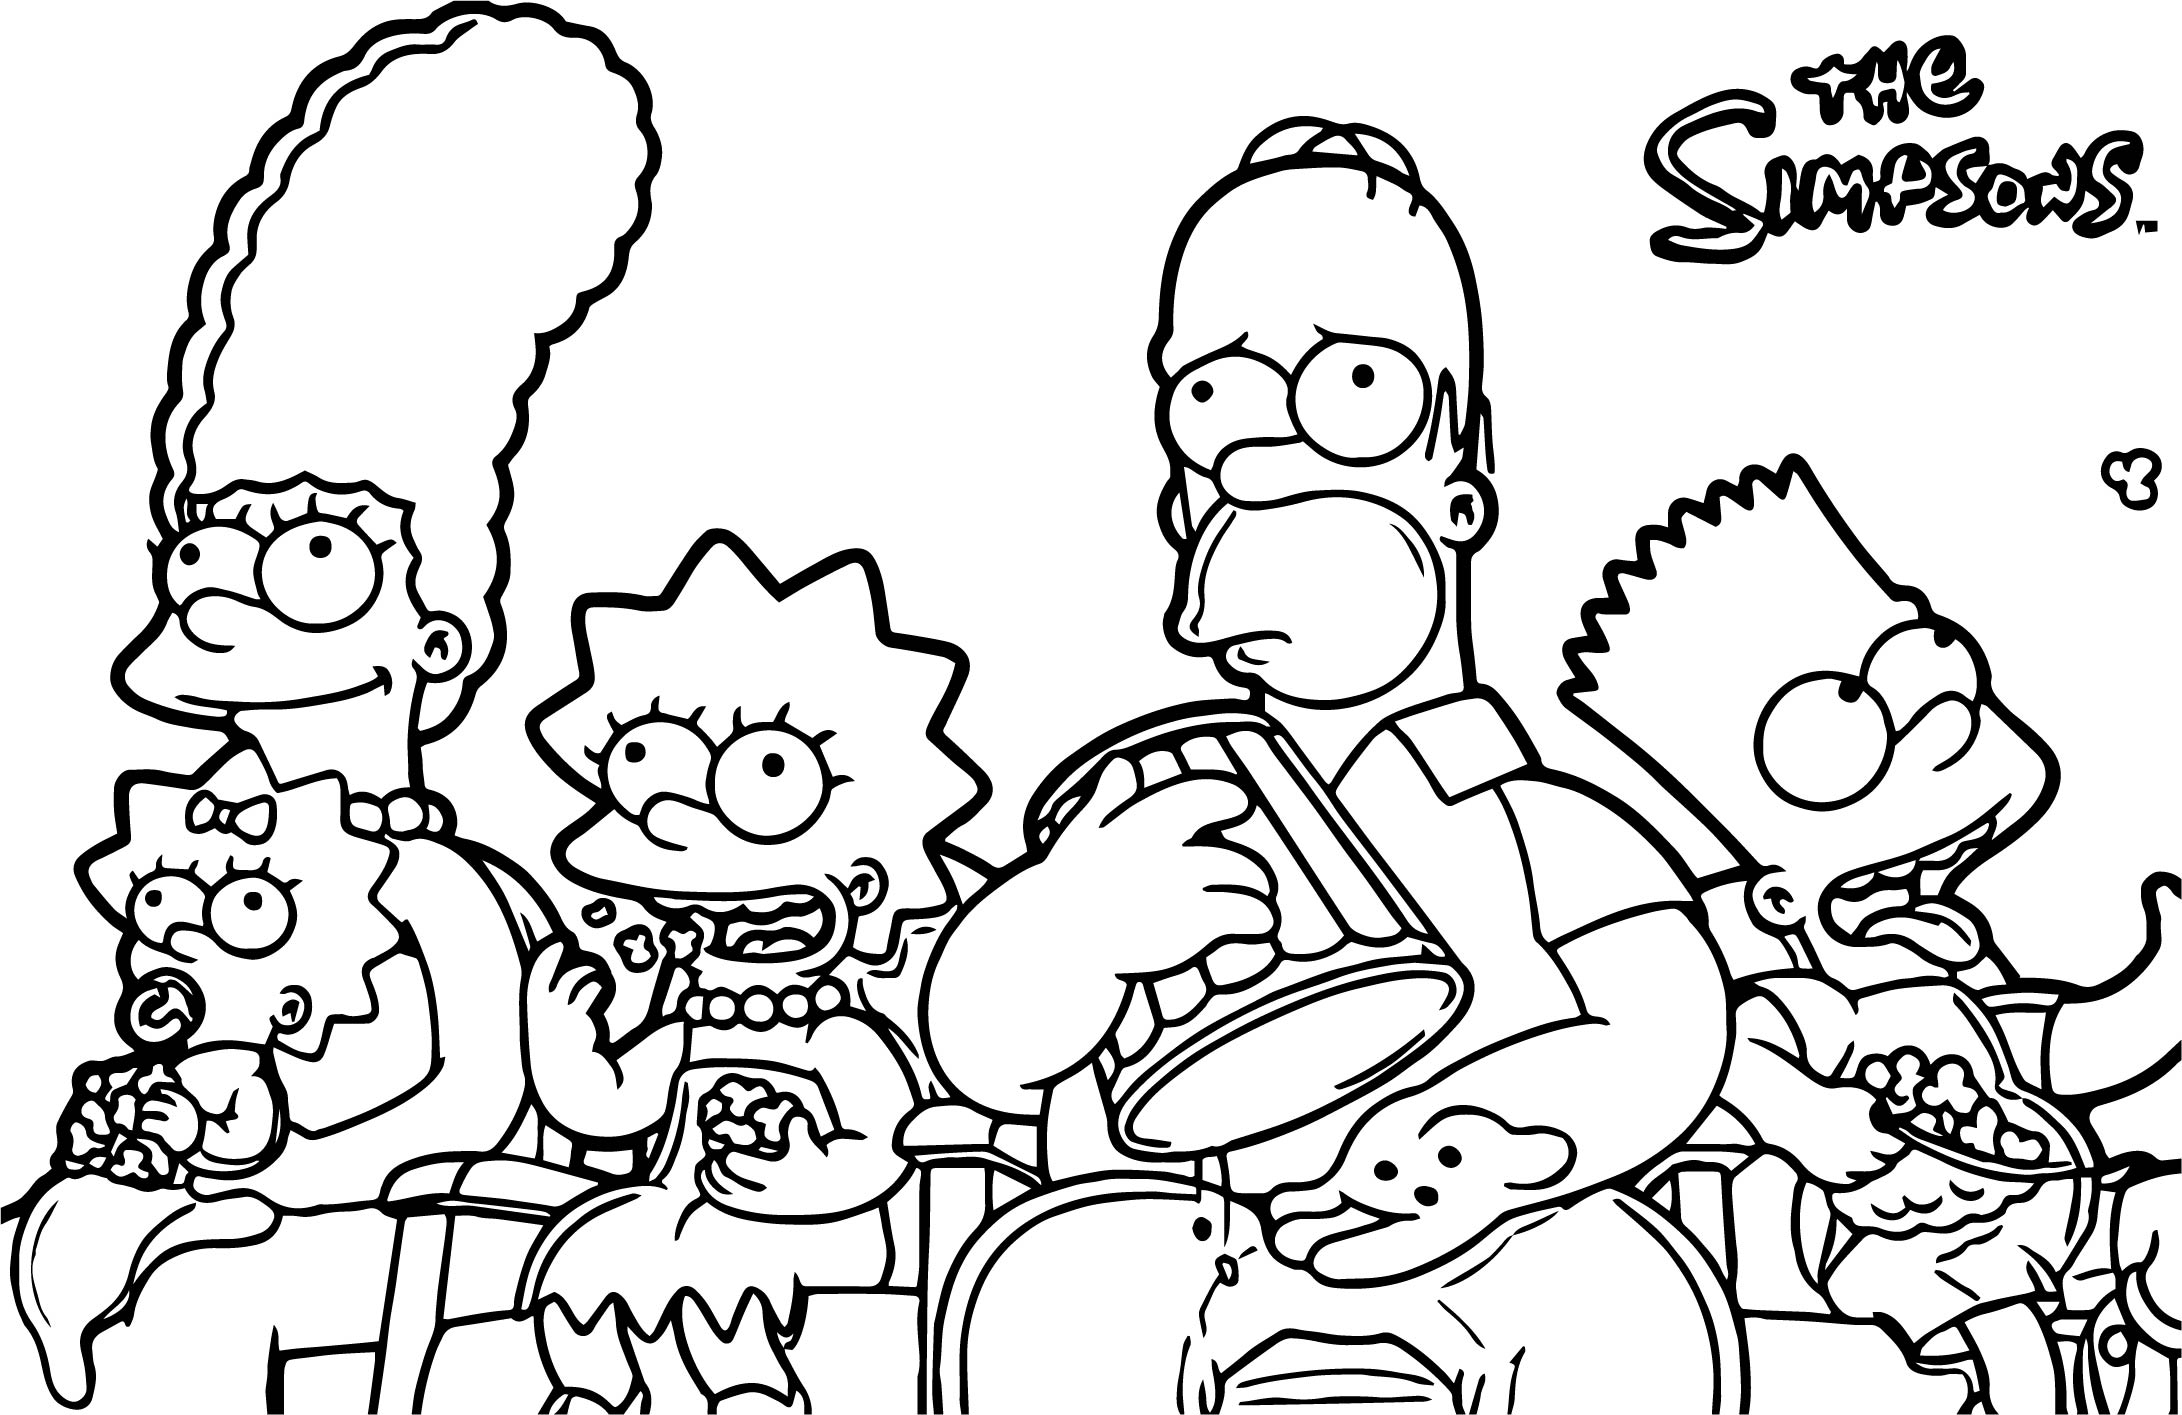 The Simpsons Coloring Pages The Simpsons Wallpaper Cinema Popcorn Coloring Page Simpsons